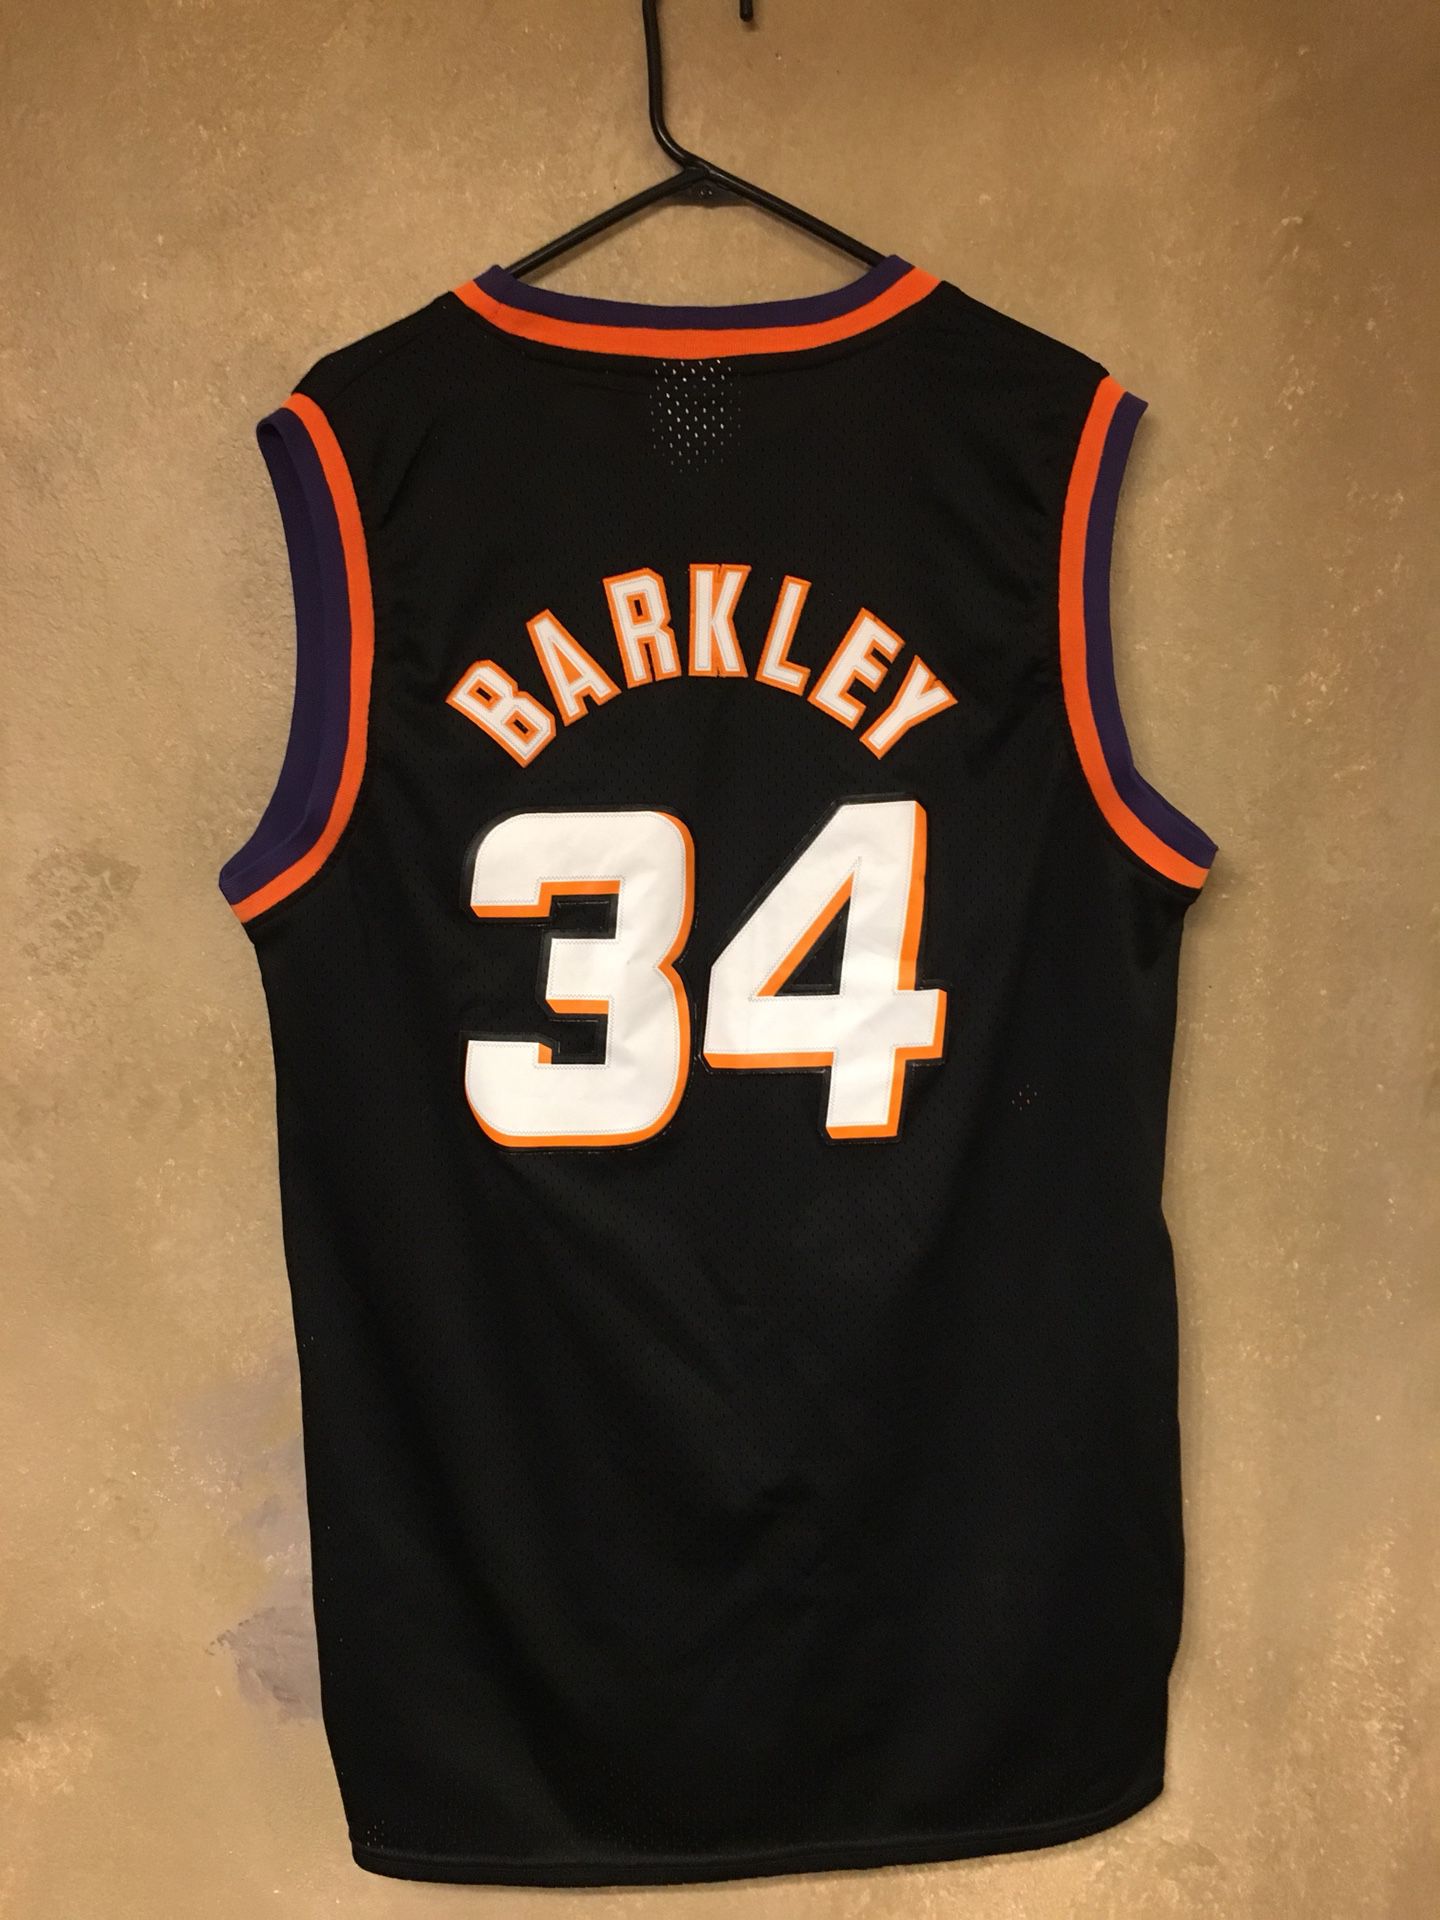 Phoenix Suns Vintage Jersey With Hat & Shoes for Sale in Miami Gardens, FL  - OfferUp